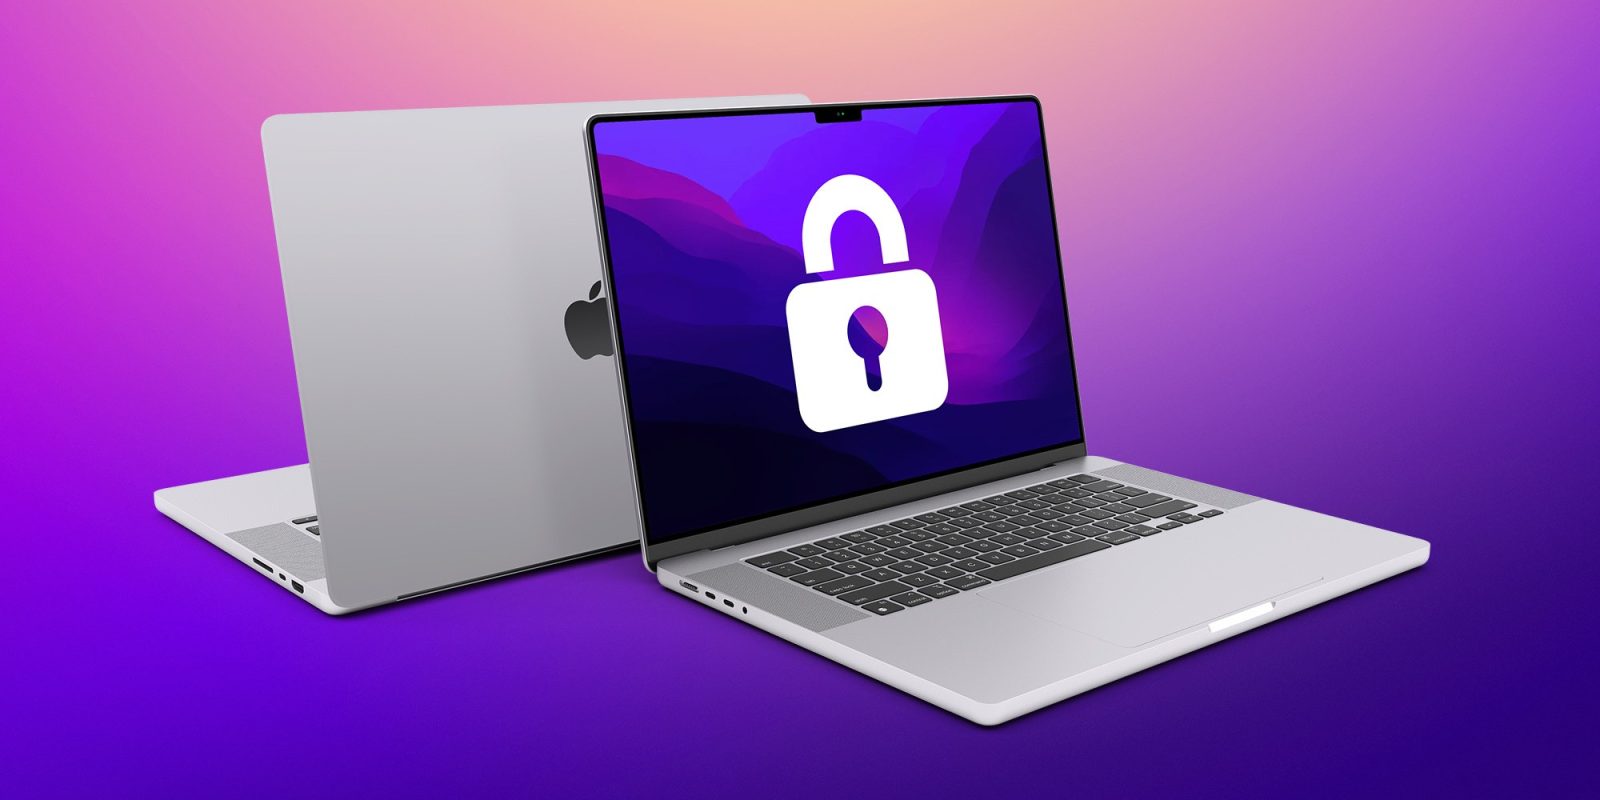 IDC survey reports that 76% of IT Decision Makers believe Macs are more secure than other computers